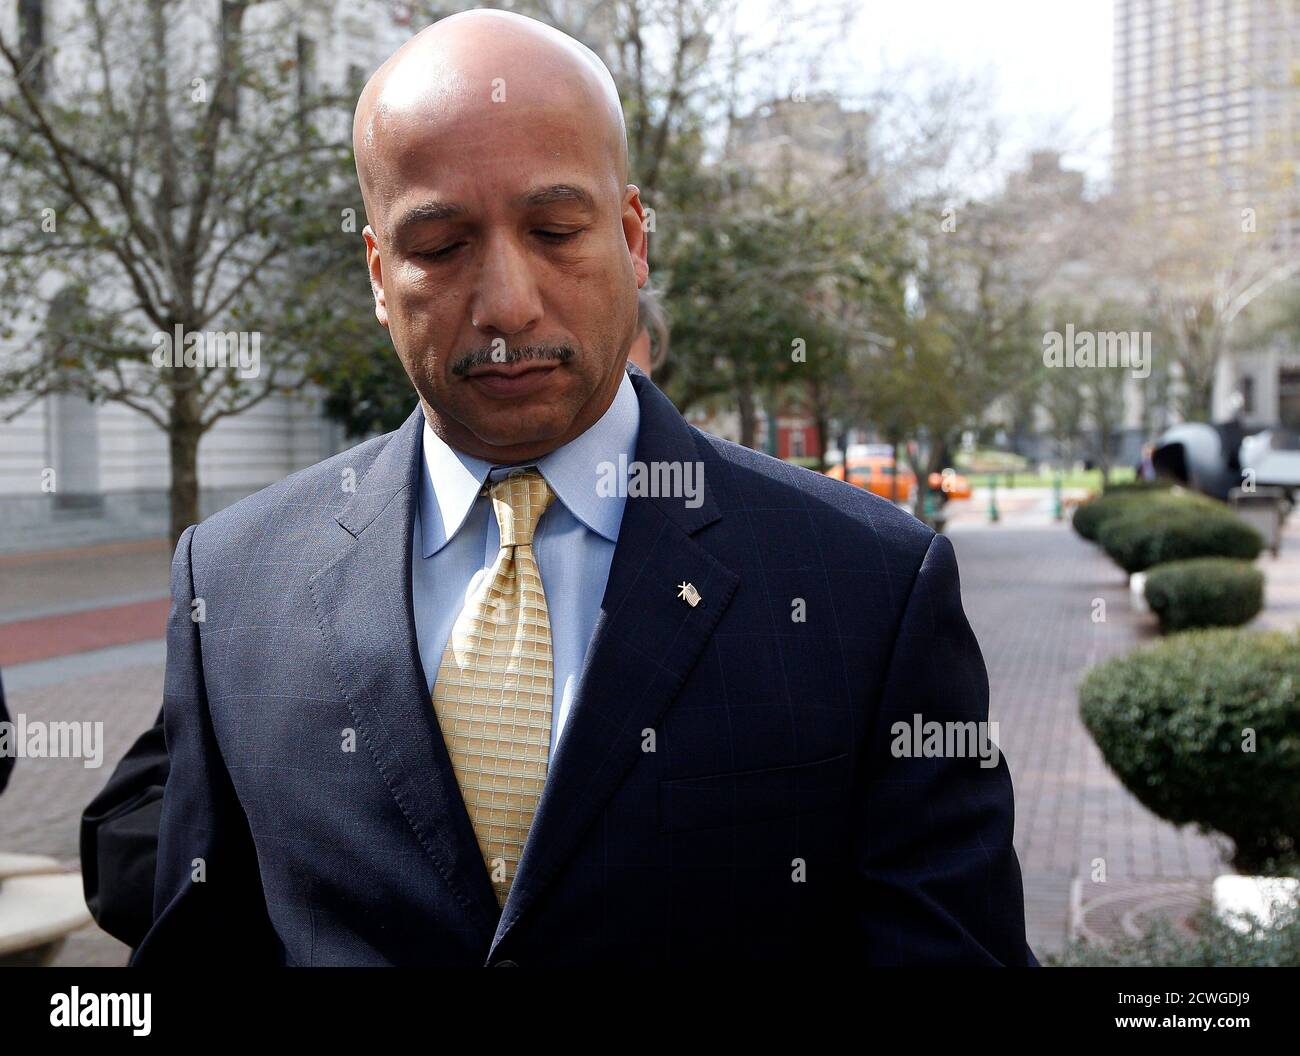 Former New Orleans Mayor Ray Nagin arrives at court in New Orleans February 20, 2013. A federal grand jury in January charged Nagin, who as mayor denounced the federal government response to Hurricane Katrina, with 21 counts of public corruption including receiving thousands of dollars in kickbacks for city services.  REUTERS/Jonathan Bachman  (UNITED STATES - Tags: CRIME LAW POLITICS) Stock Photo